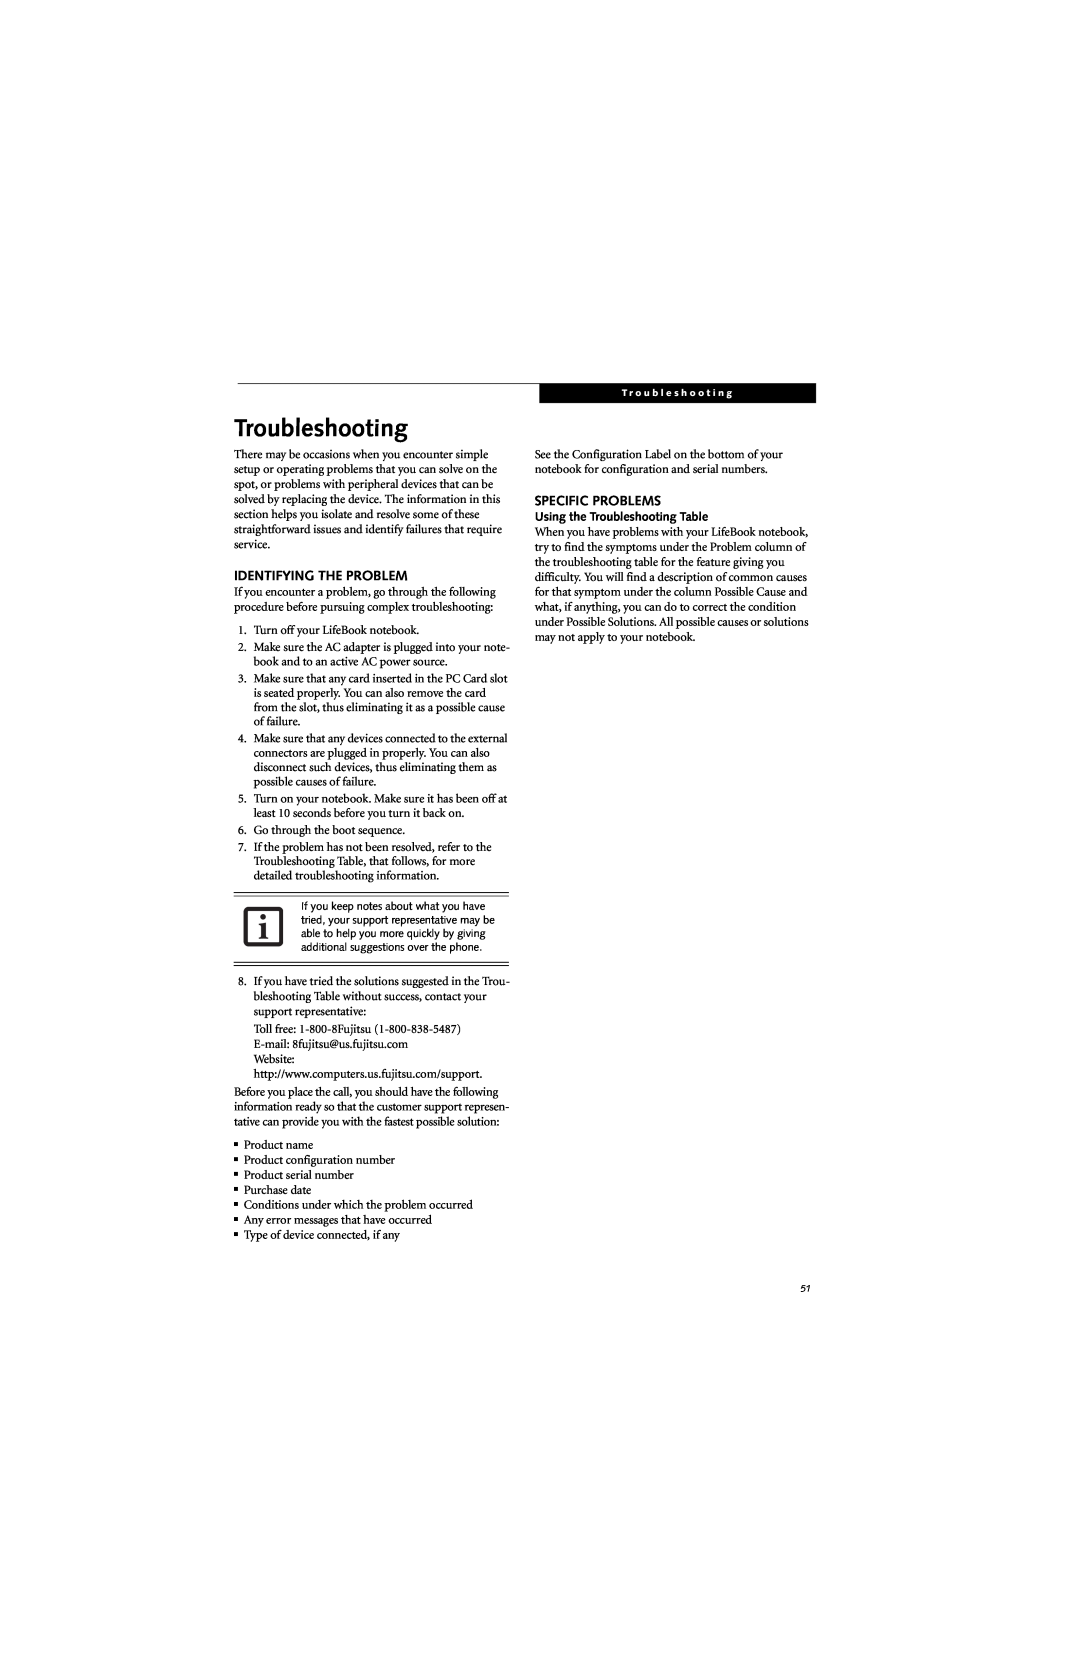 Fujitsu E8310 manual Identifying The Problem, Specific Problems, Using the Troubleshooting Table 